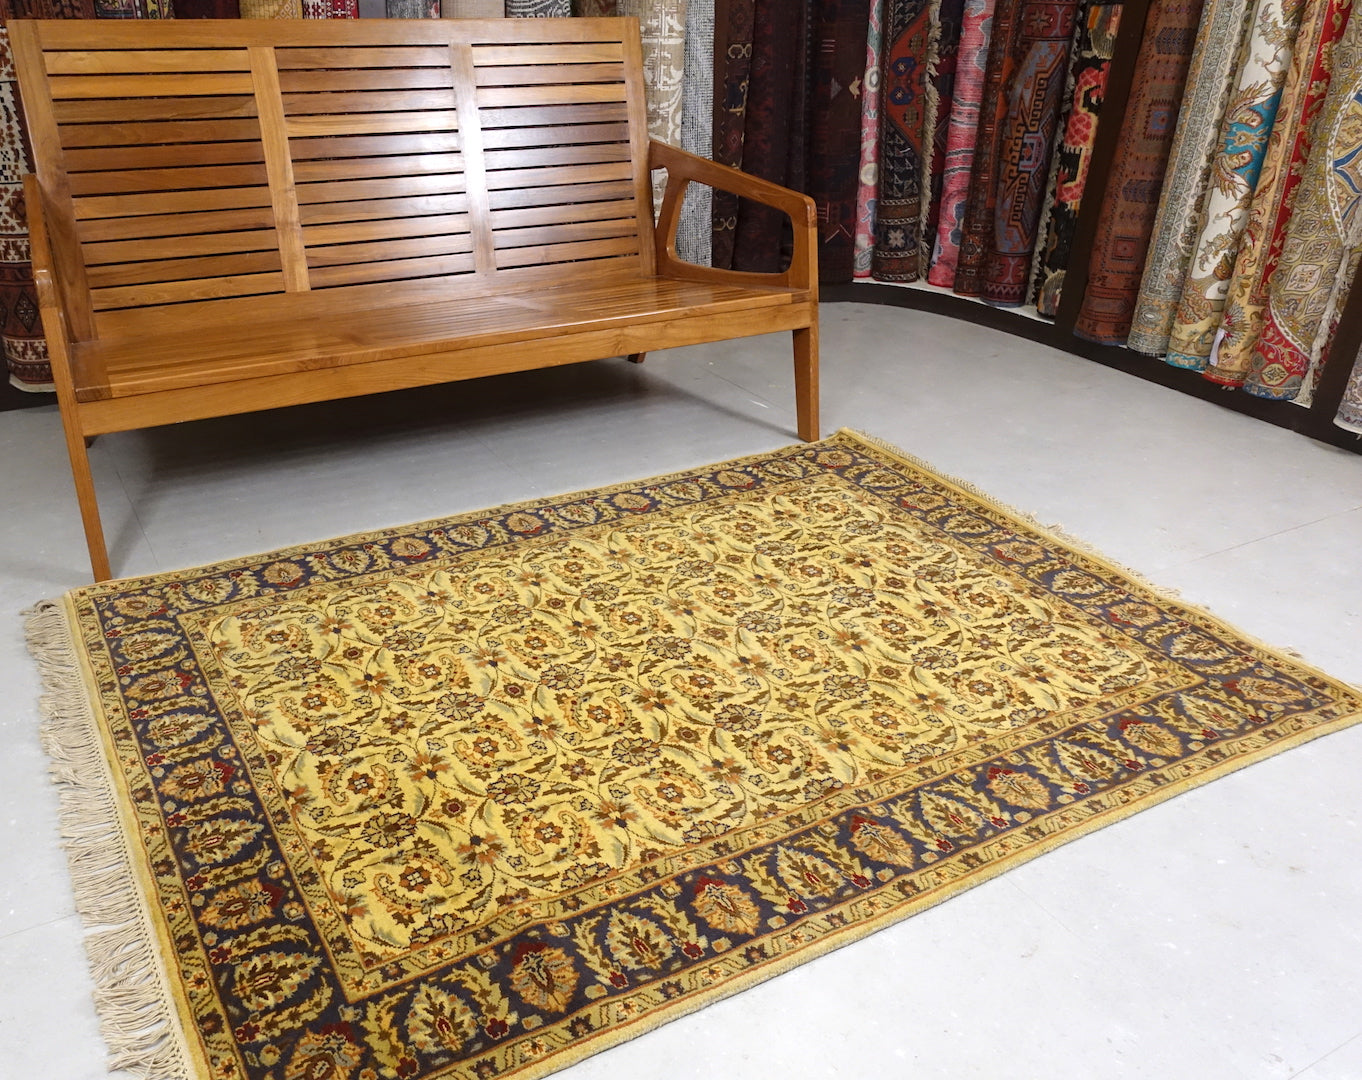 It is a 4 feet by 6 feet Indian wool rug with yellow, dark blue, rust and cherry colours.